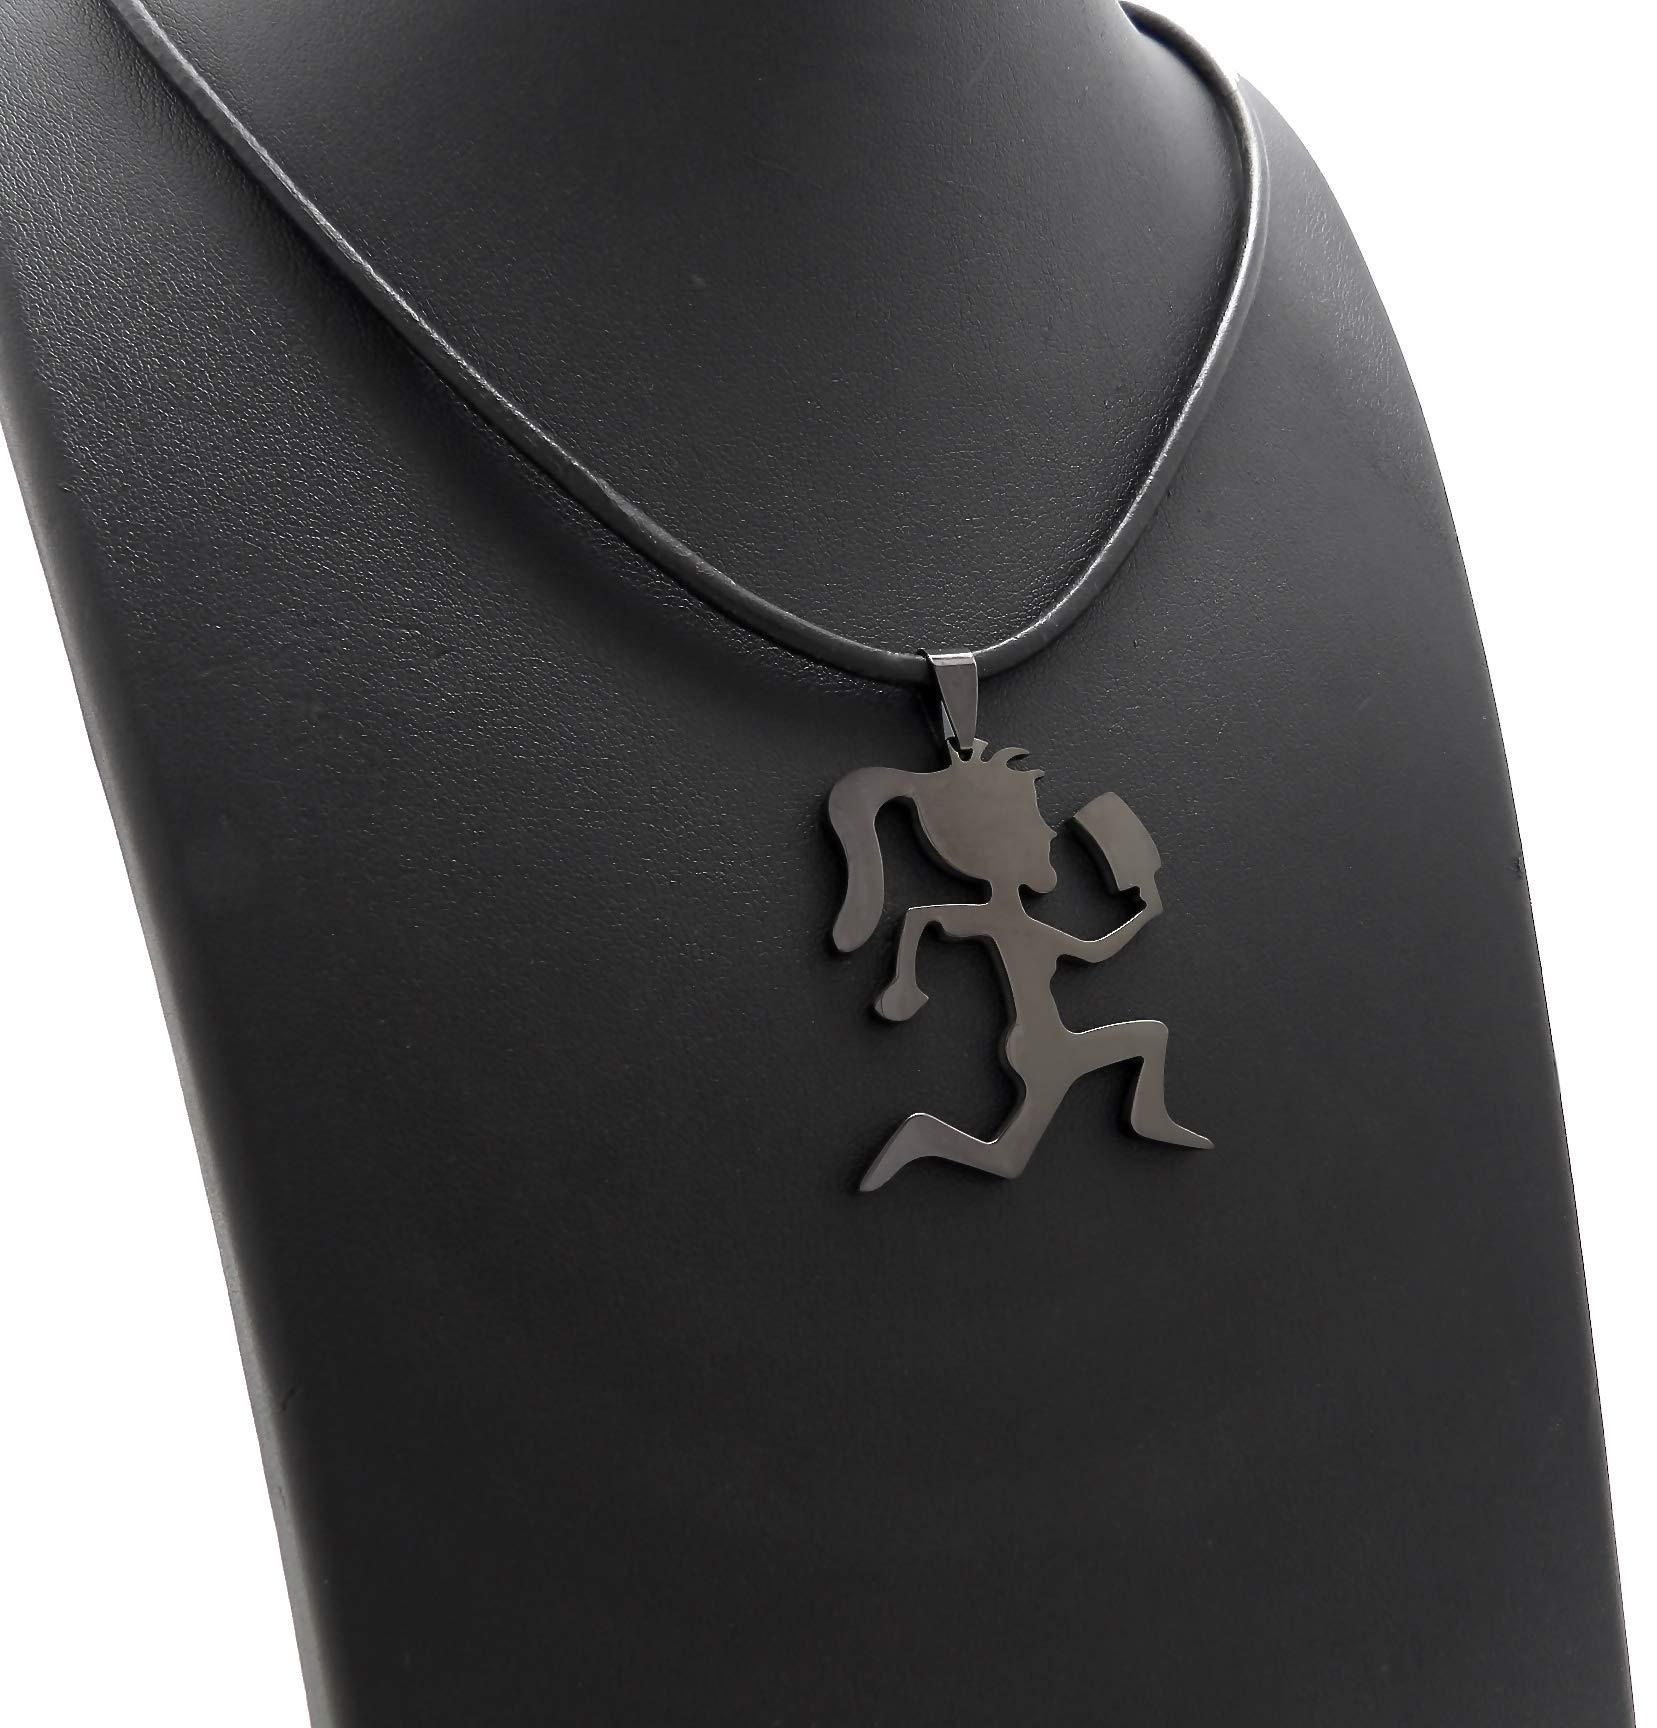 GWOOD Juggalette Pendant with 18 Inch Cord Necklace Gun Metal Color